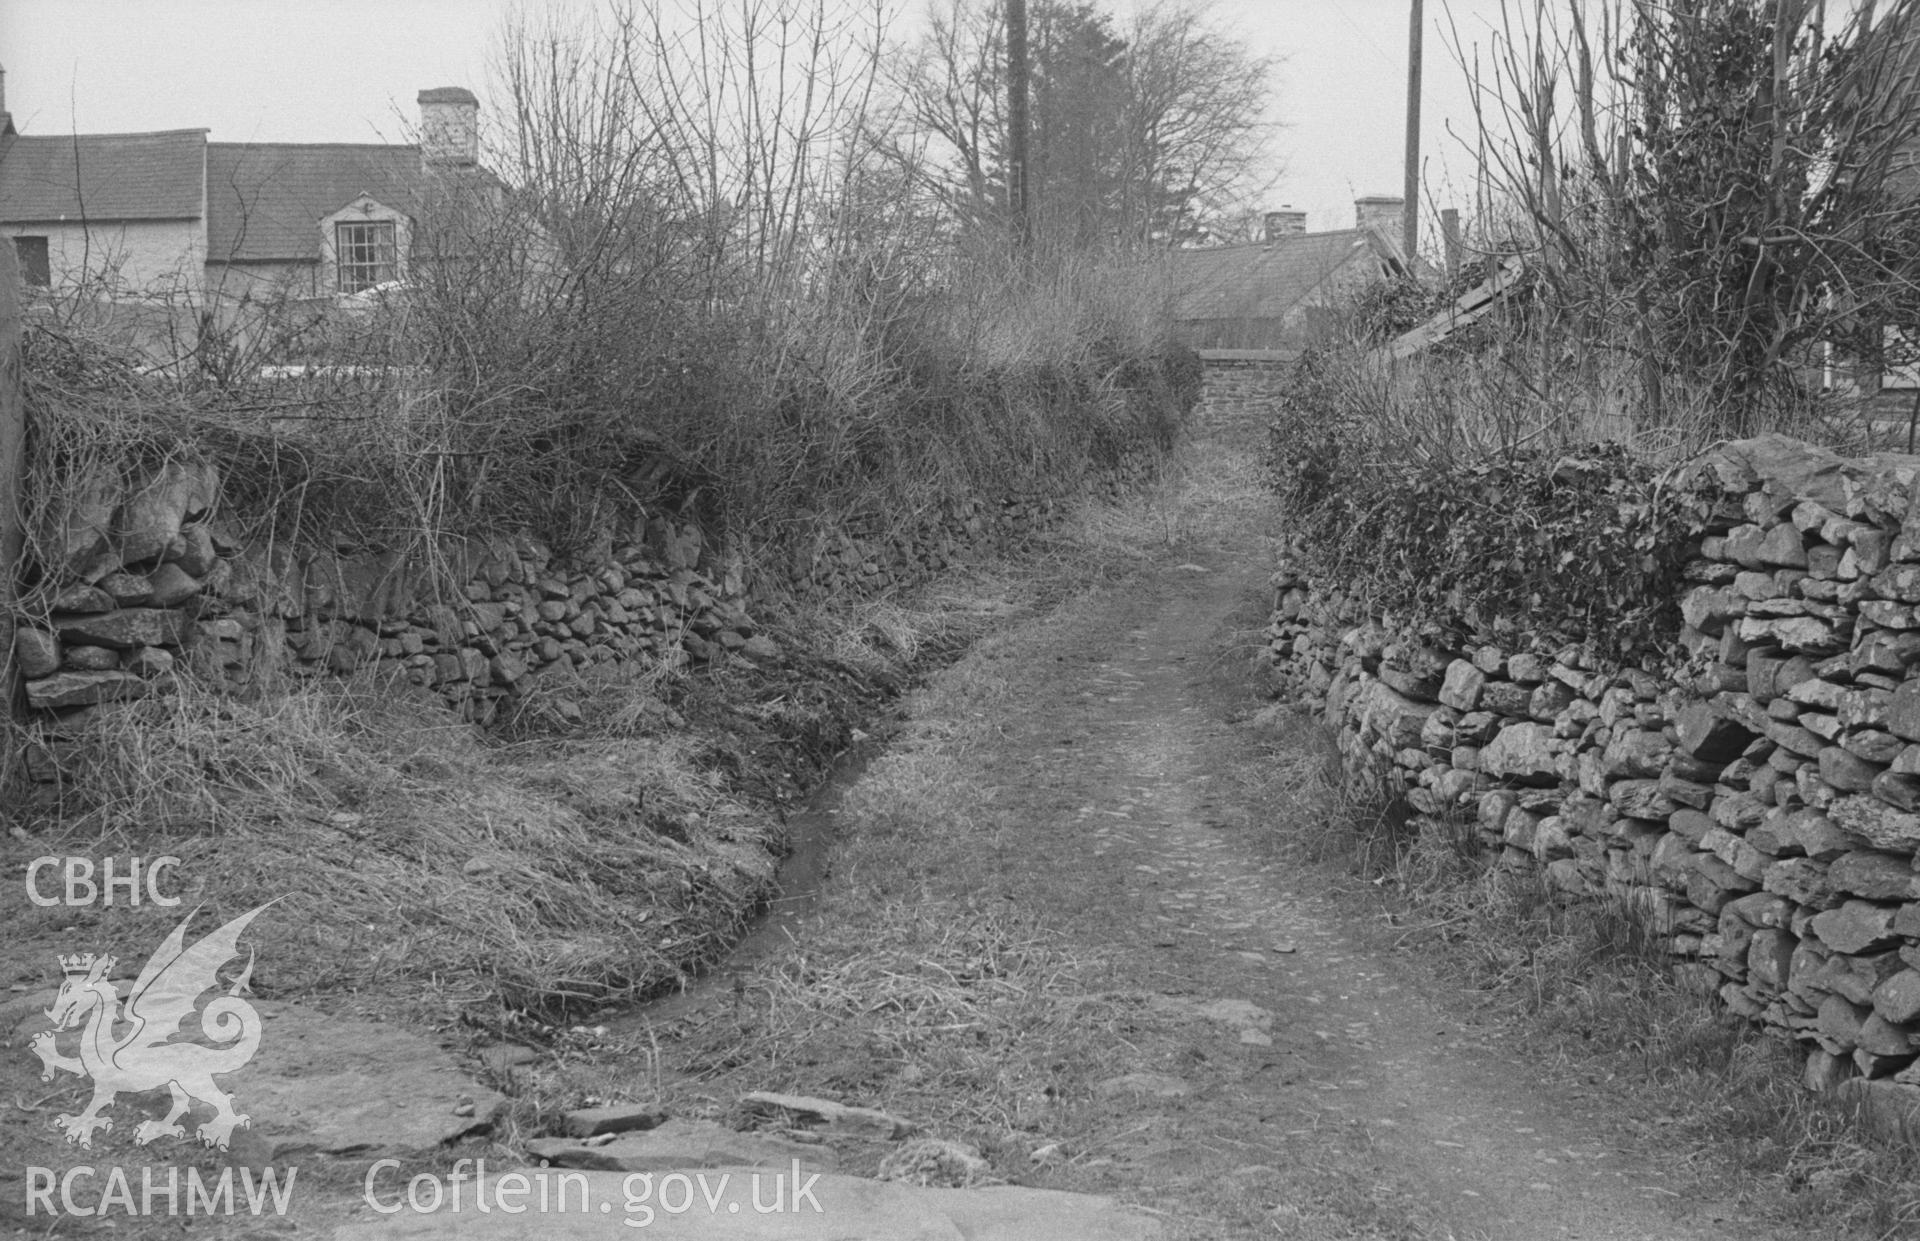 Digital copy of a black and white negative showing site of mill stream at Llanddewi Brefi. Photographed in April 1963 by Arthur O. Chater.